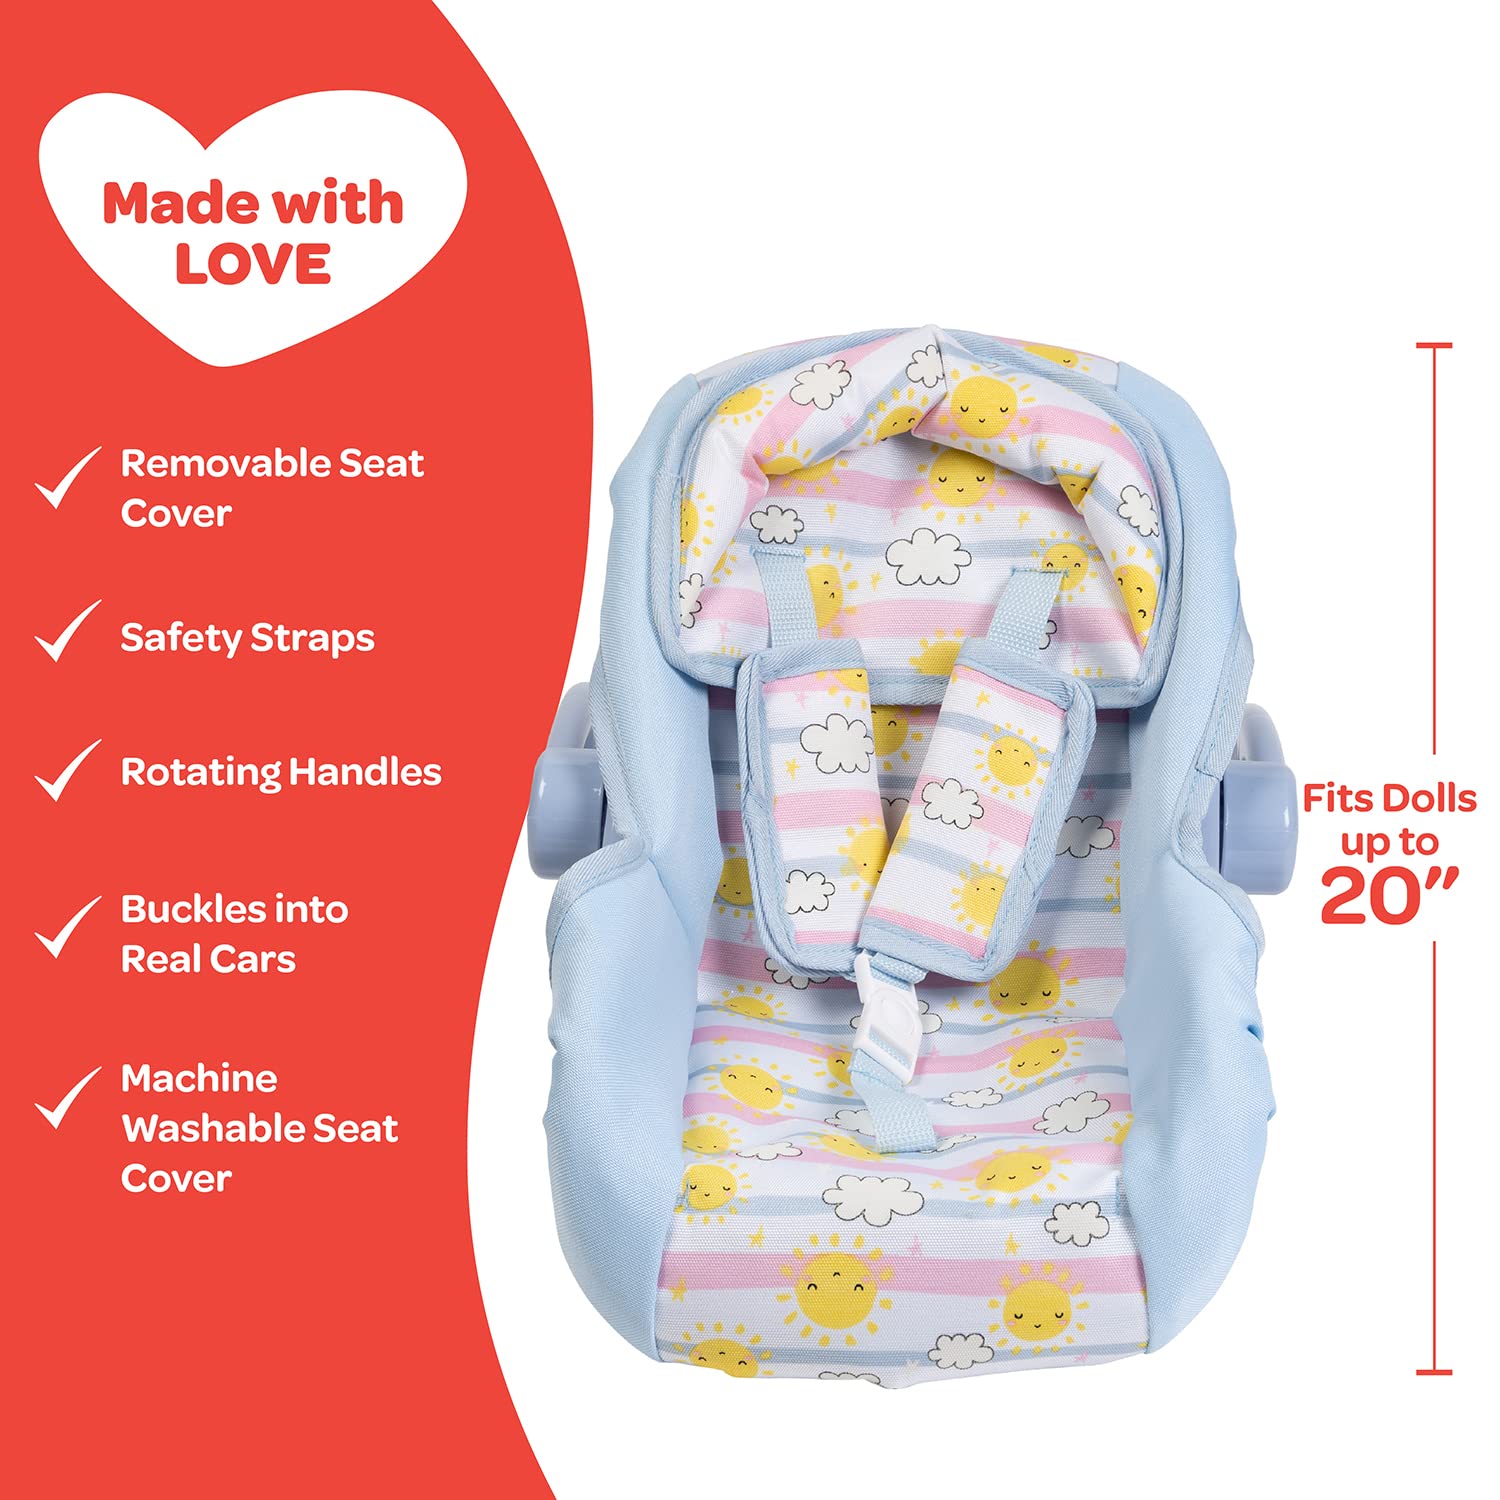 Adora Baby Doll Car Seat Carrier with Color Changing Sunny Days Print, Fits Dolls Up to 20 Inches